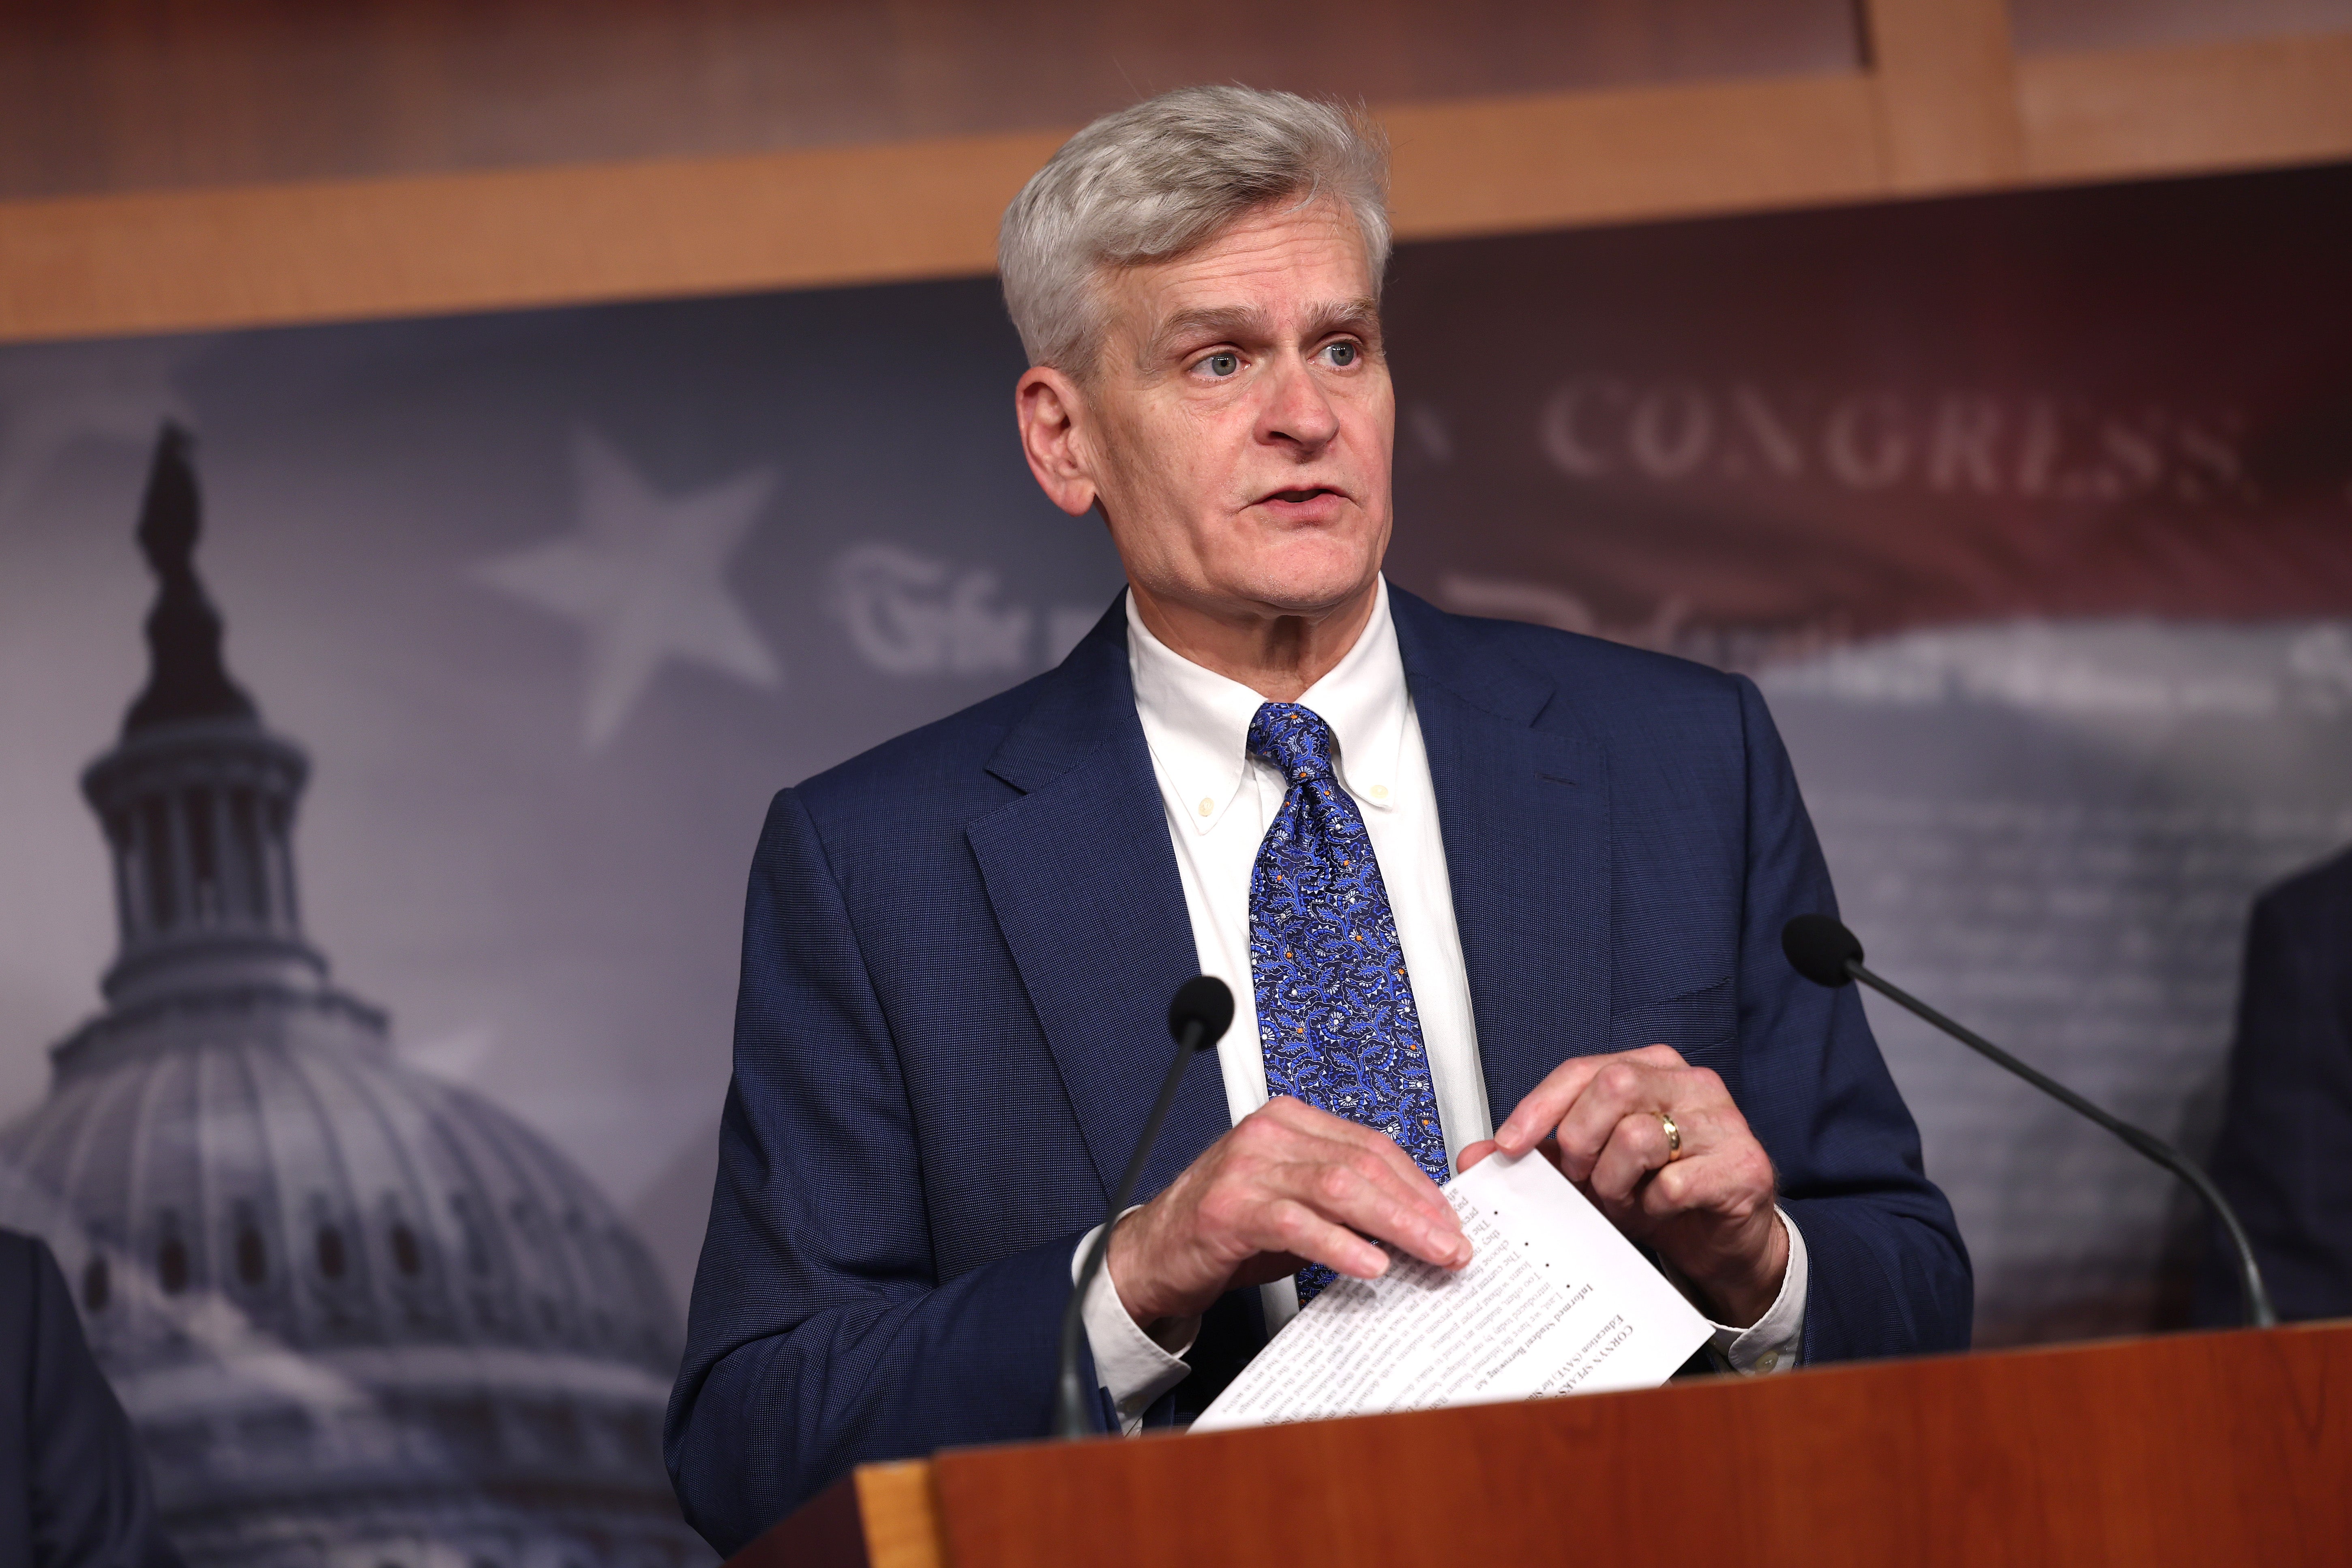 Sen Bill Cassidy (R-LA) voted to convict Donald Trump for his role in the January 6 riot